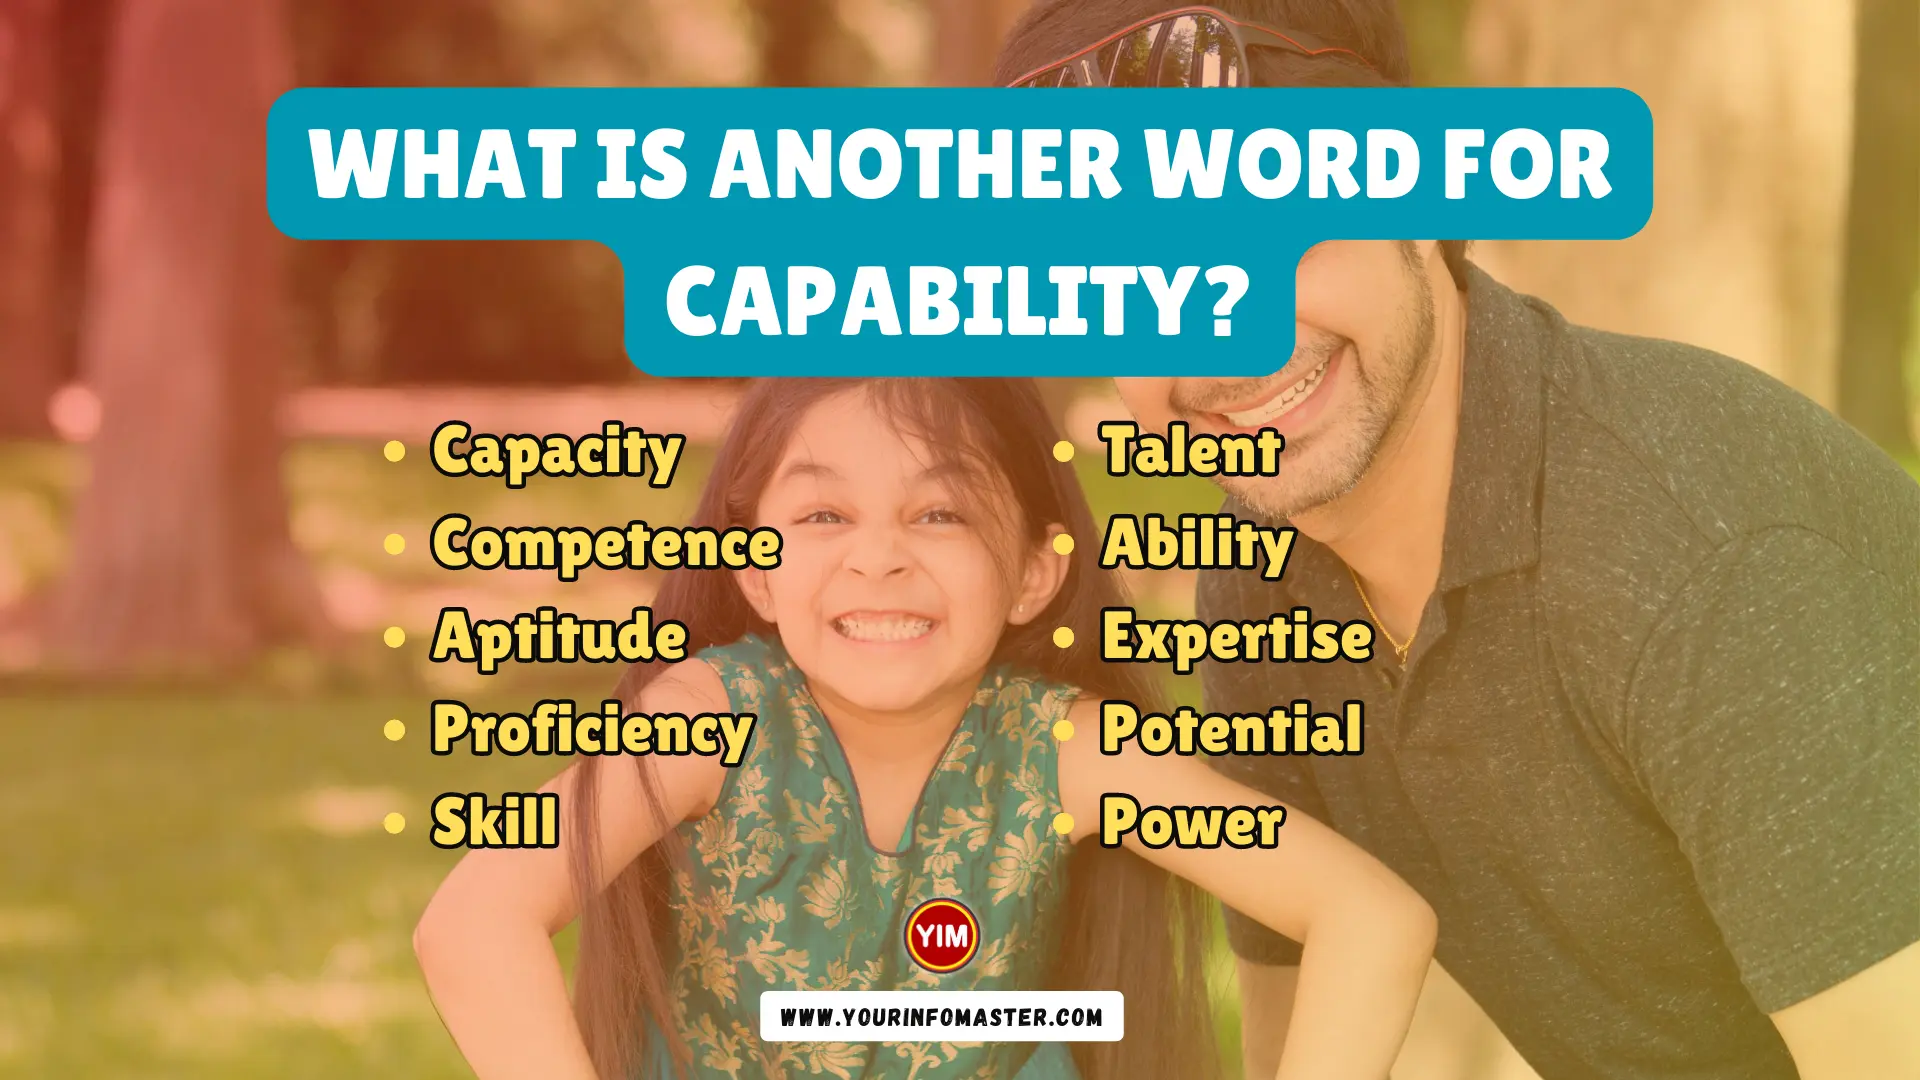 What is another word for Capability